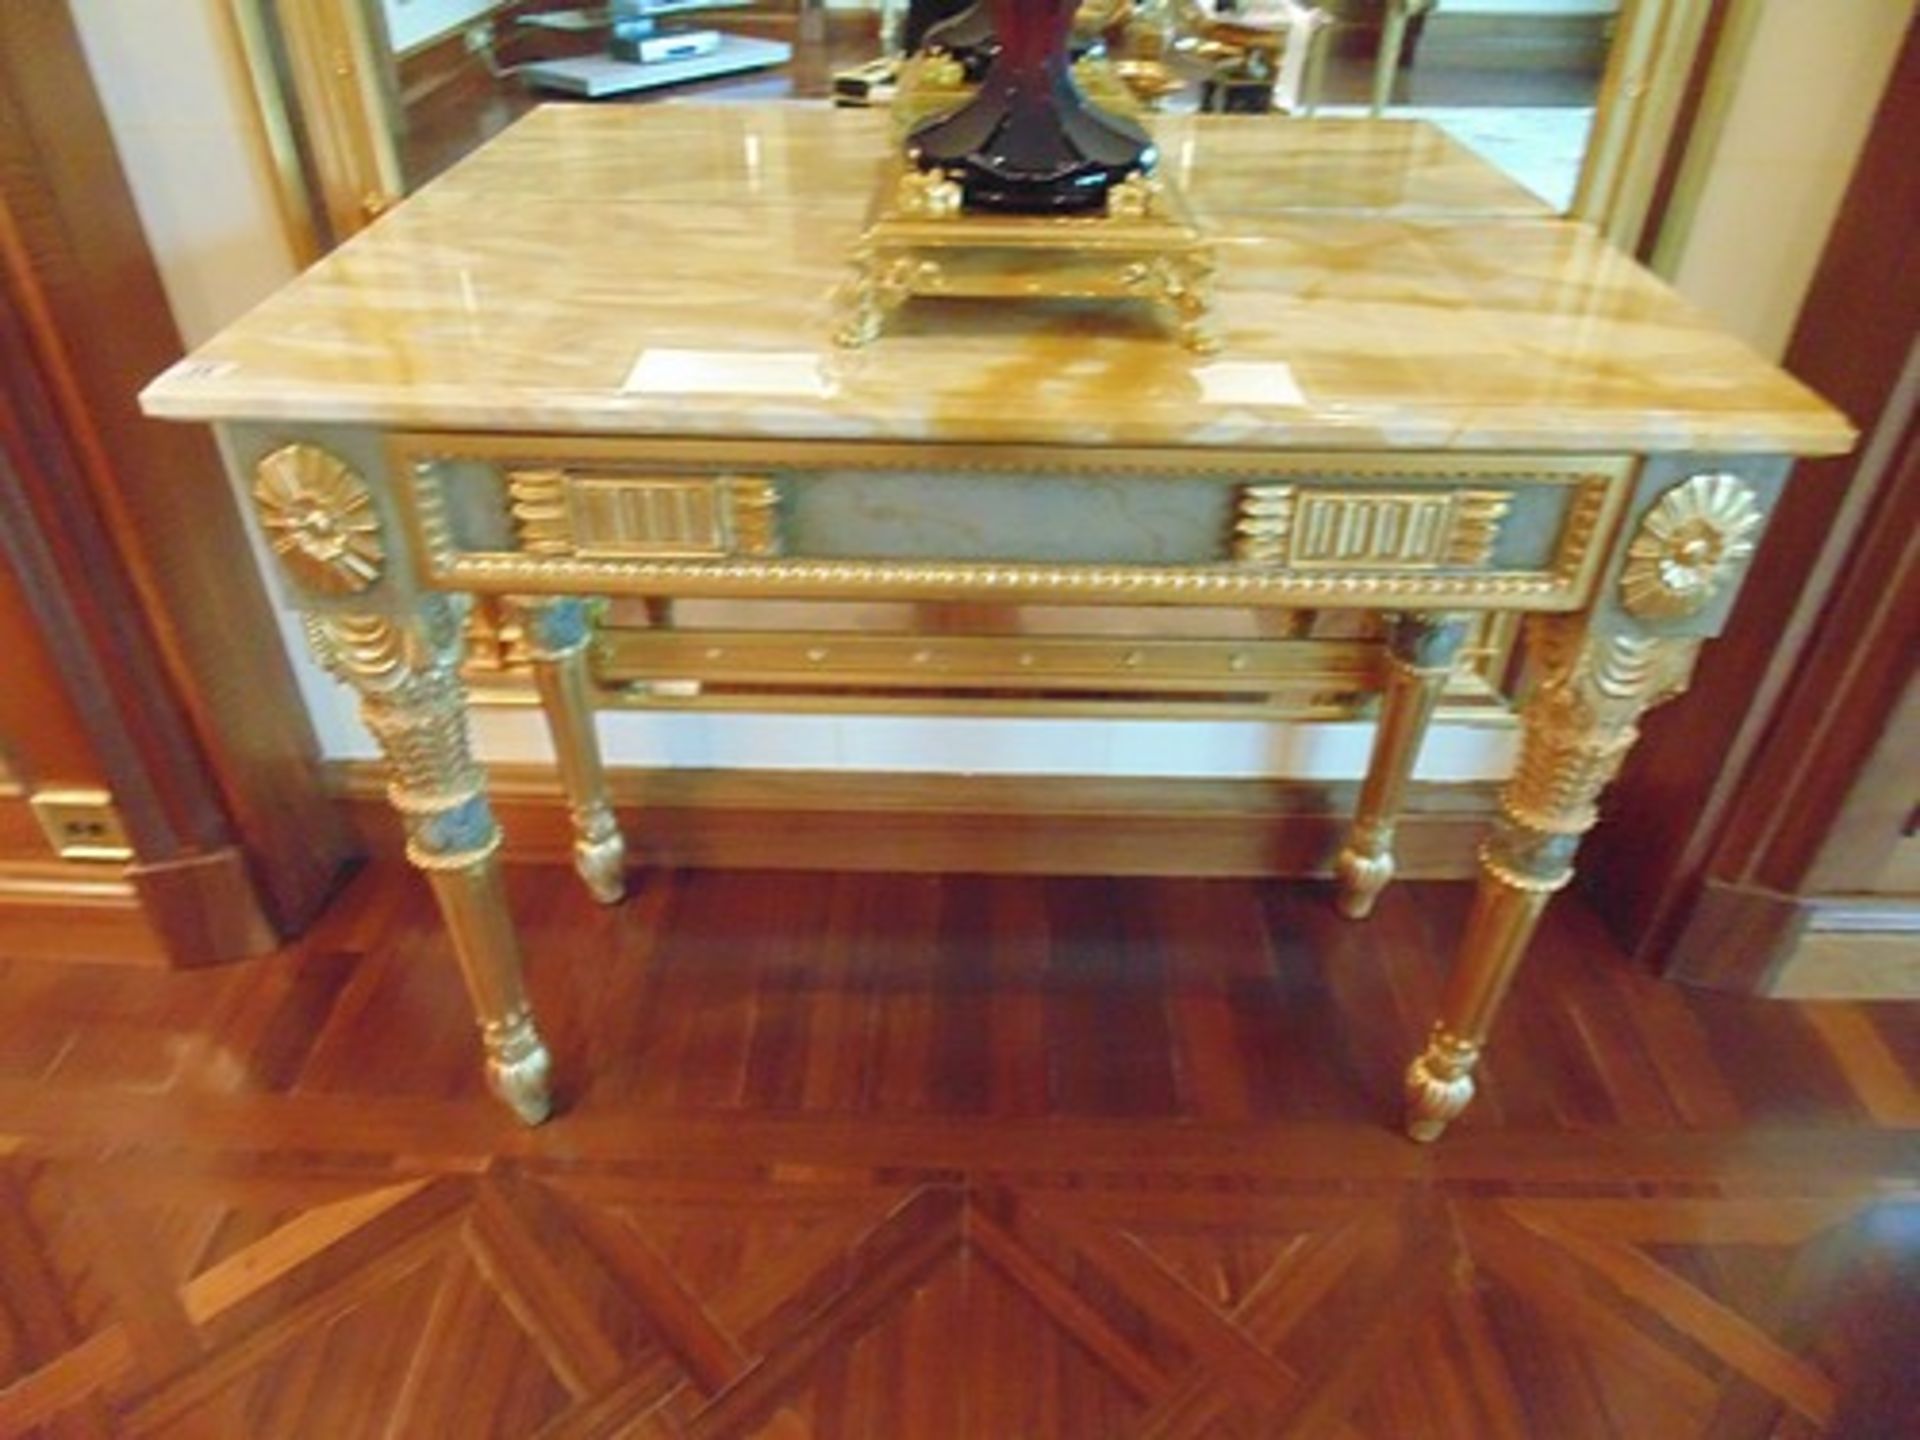 Neoclassical Italian painted and parcel gilt console with marble top, applied medallions detail on